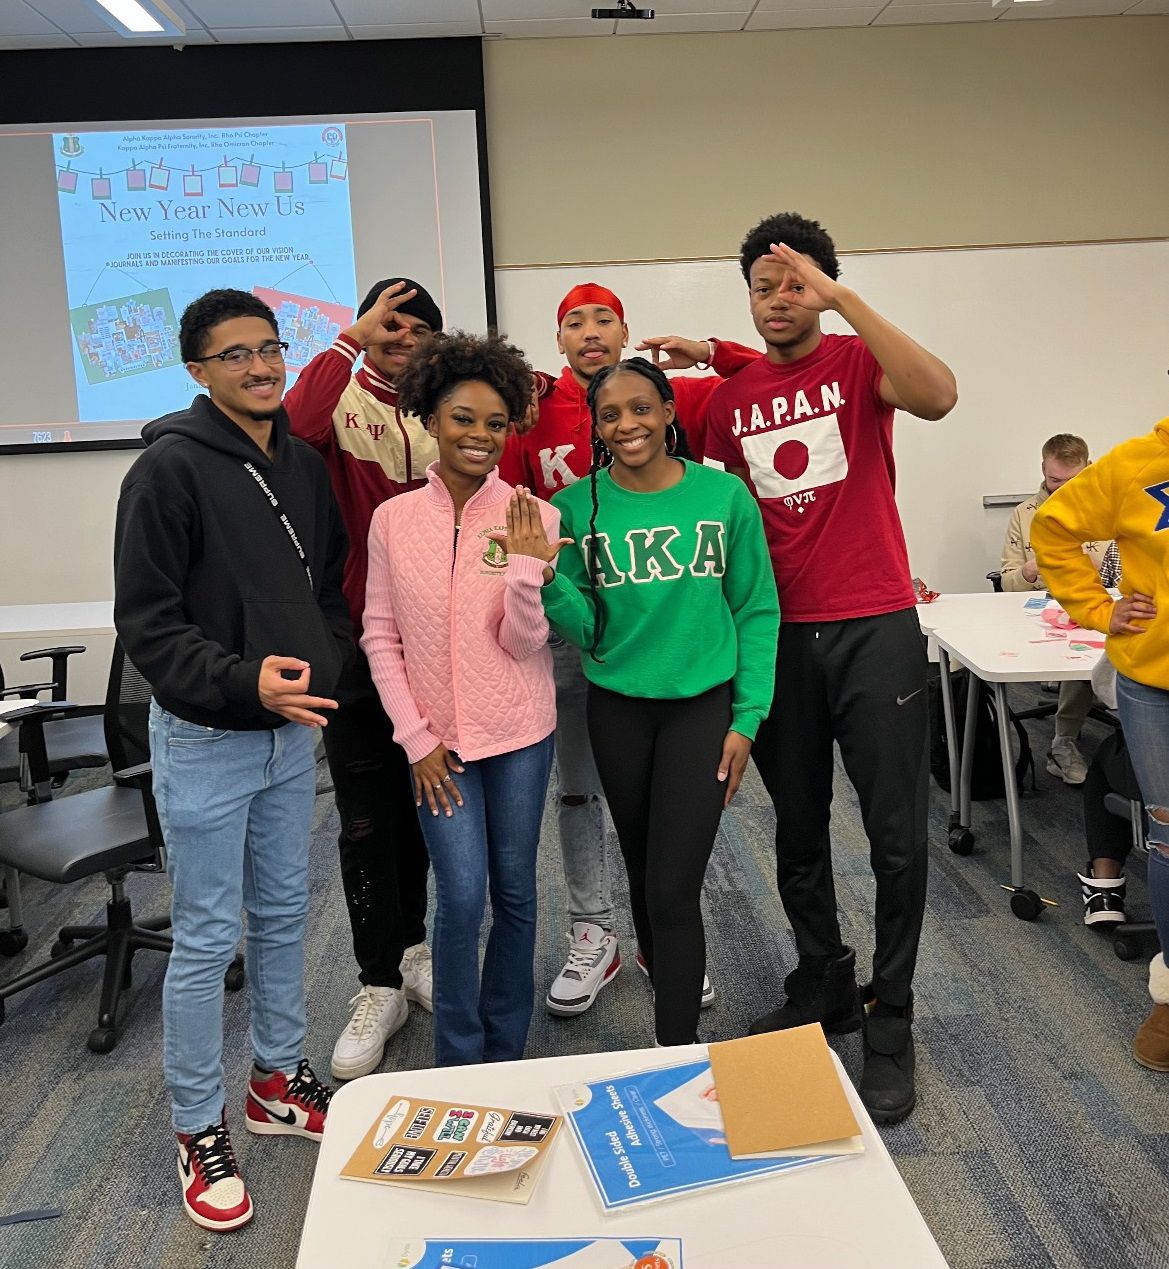 A Black fraternity and sorority at Xavier University sponsored a vision board event to encourage students to manifest their goals and aspirations. (Photo courtesy of Shanna Turner)